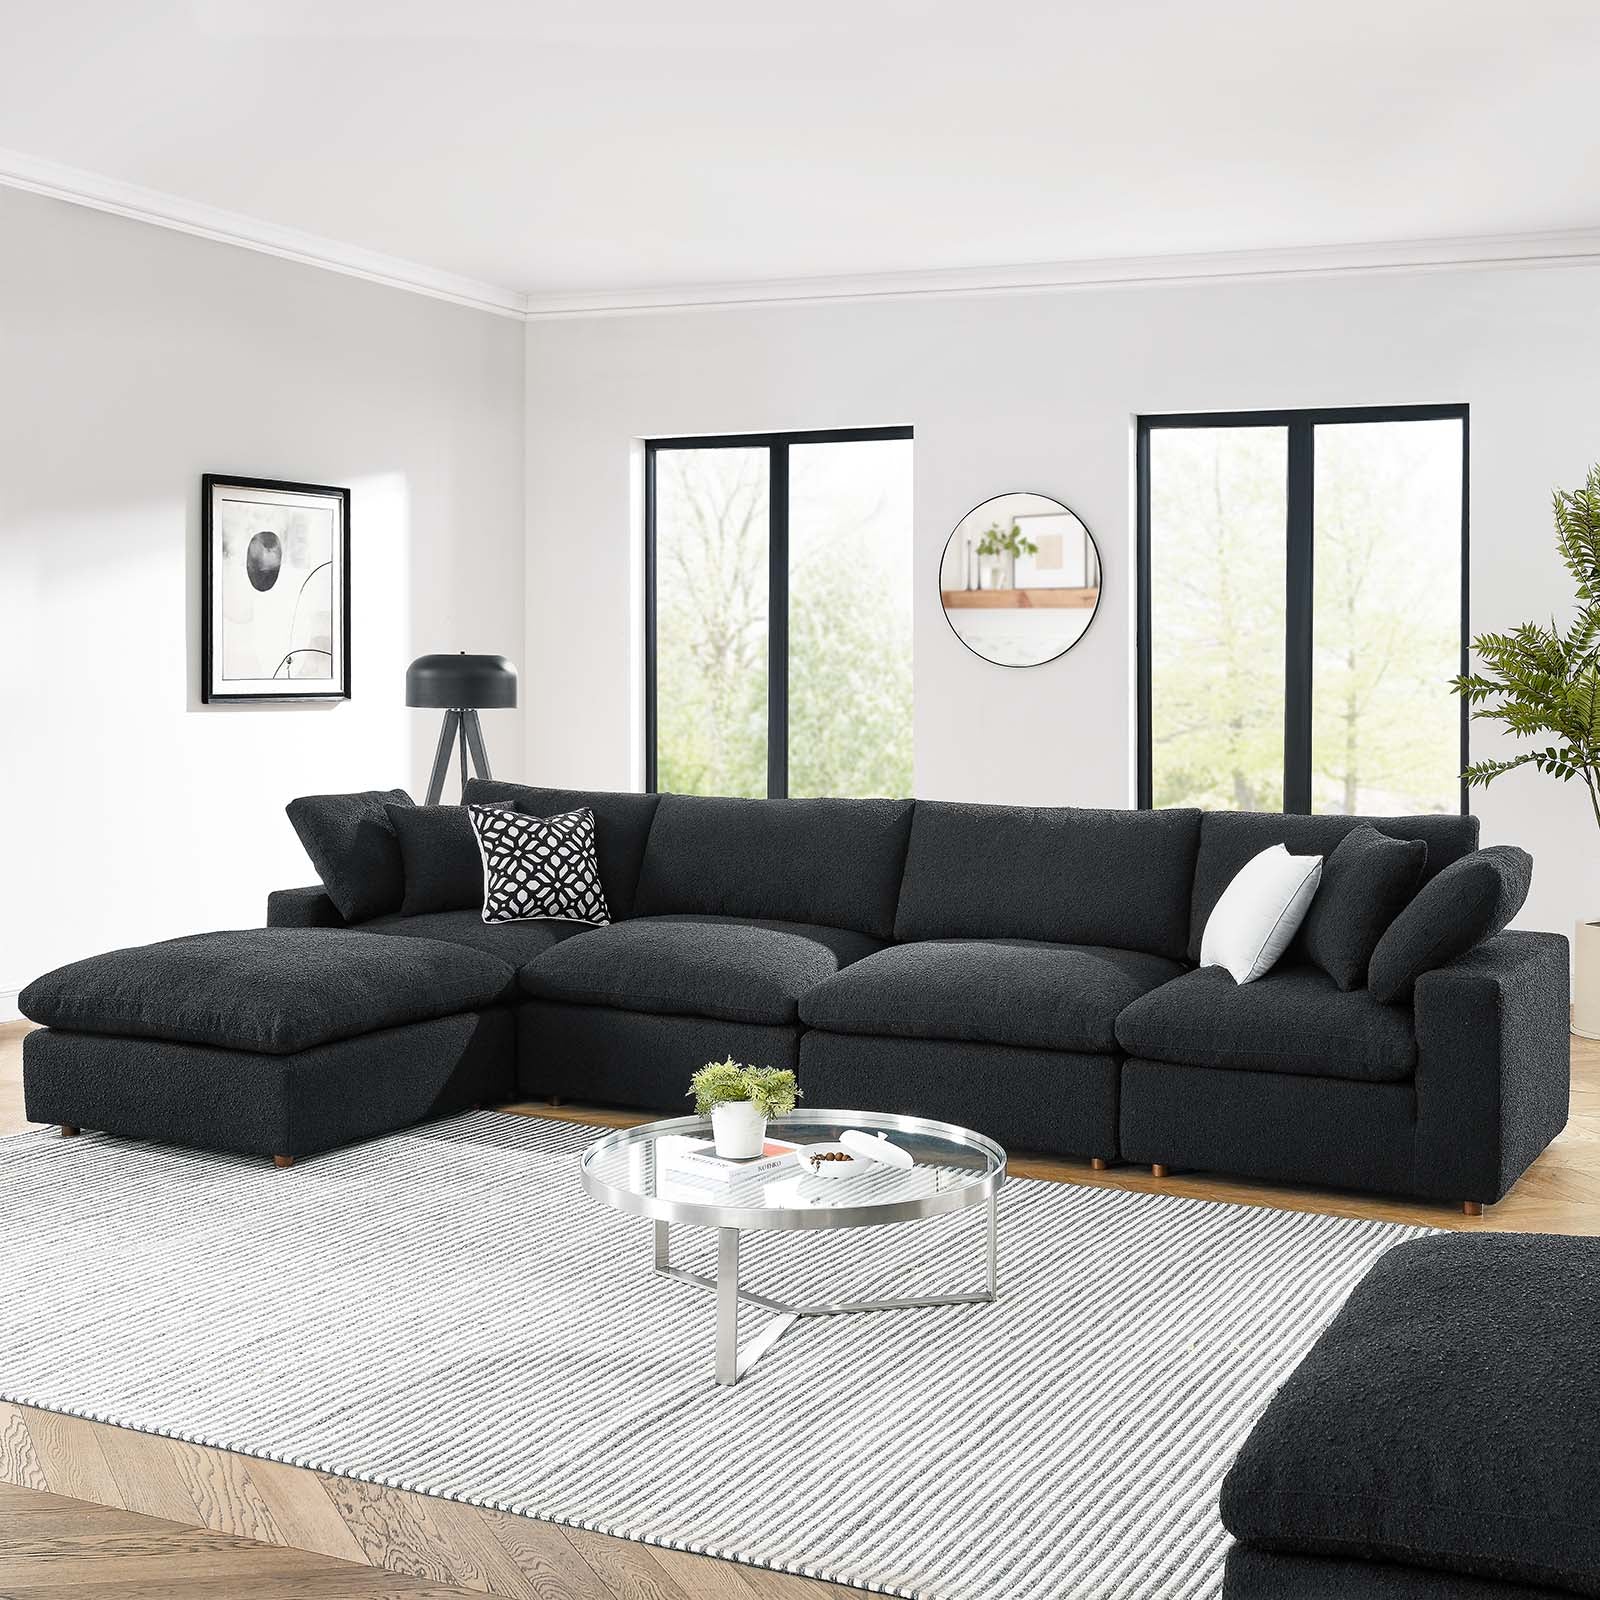 Commix Down Filled Overstuffed Boucle Fabric 5-Piece Sectional Sofa-Sectional-Modway-Wall2Wall Furnishings